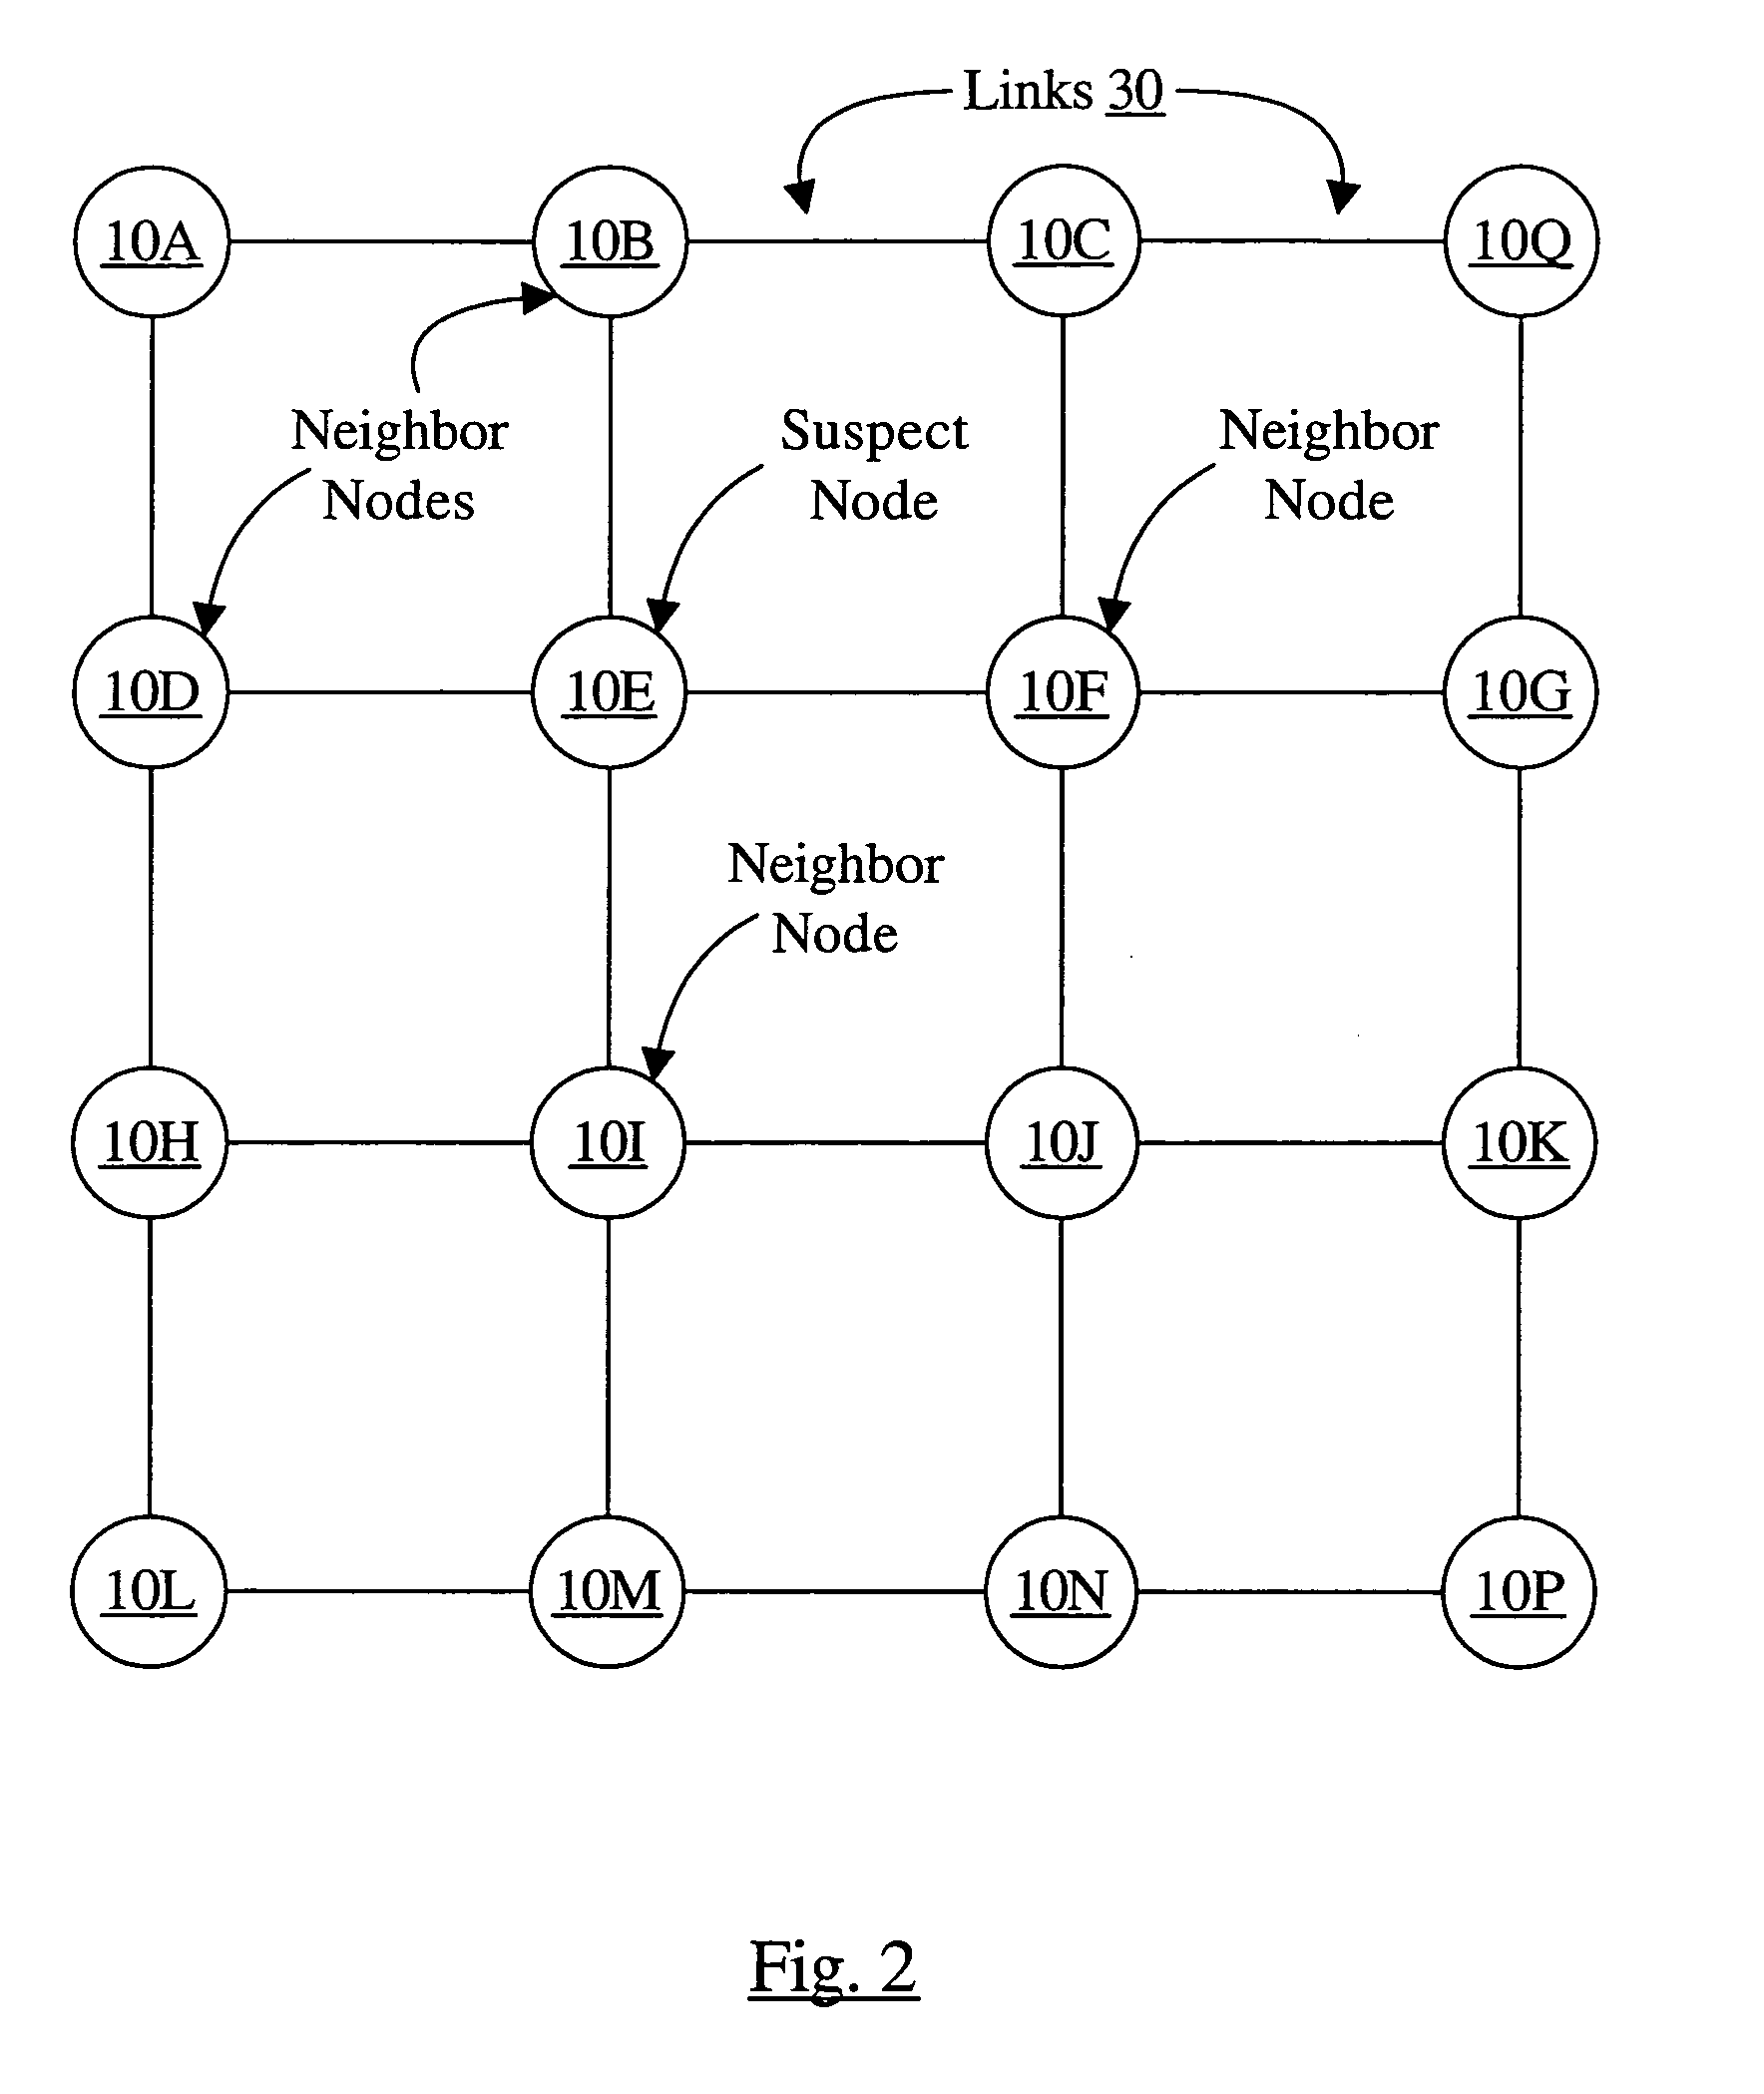 Fault isolation in large networks